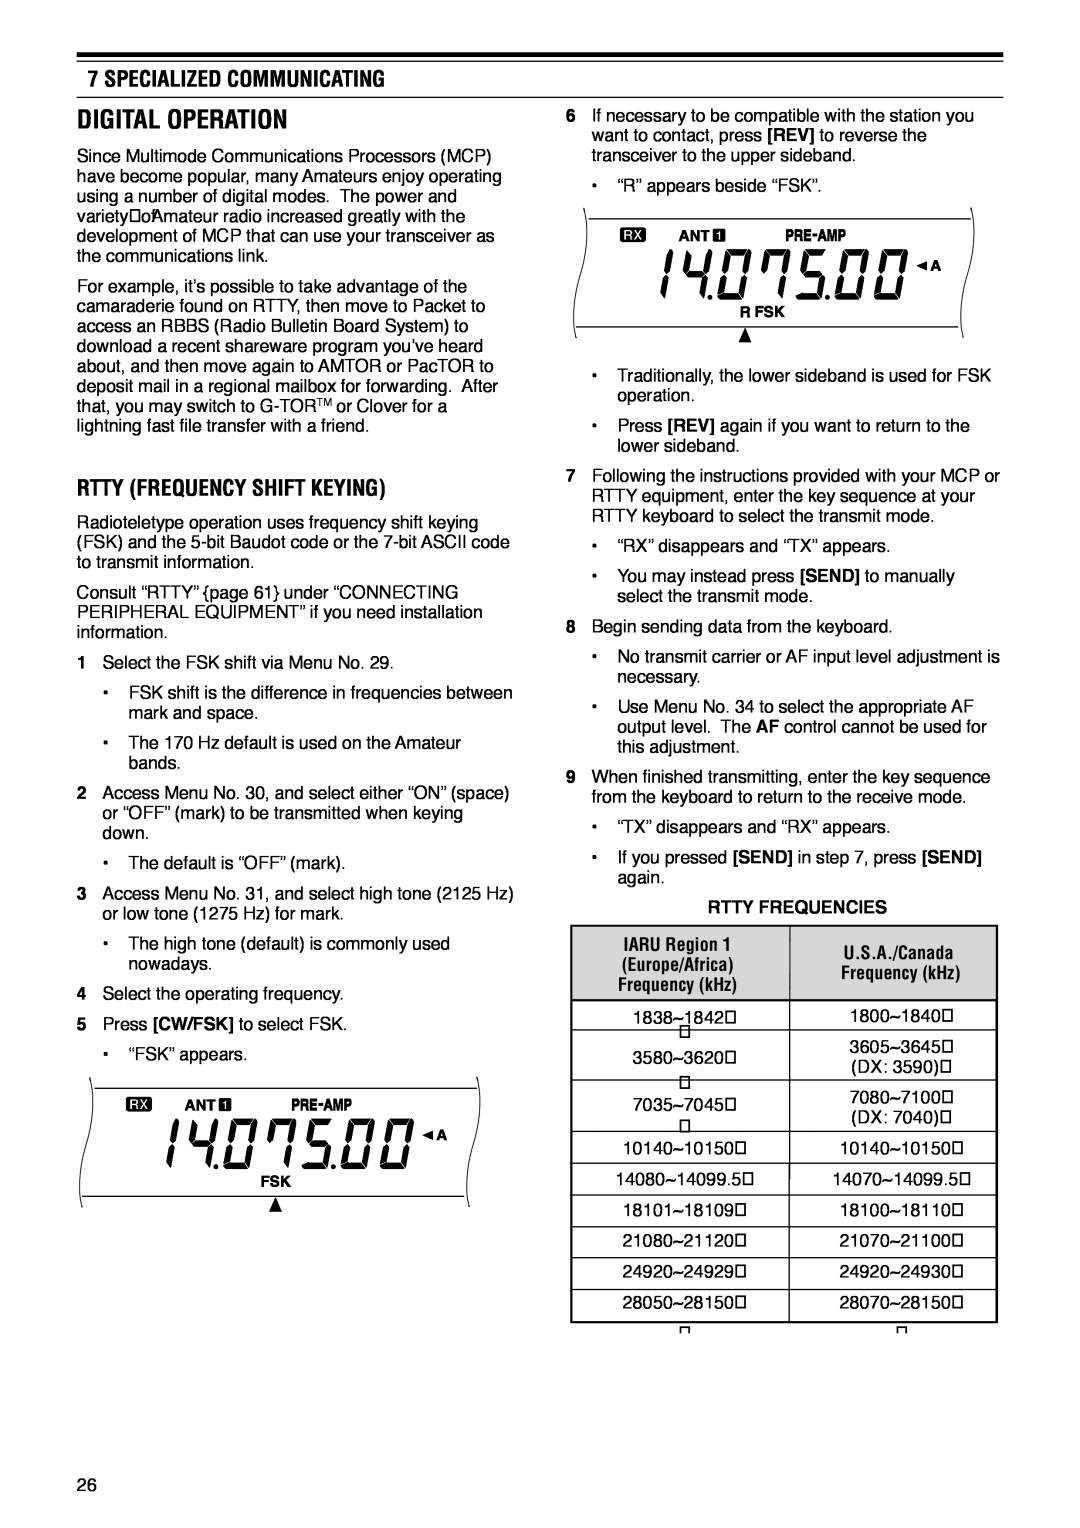 Kenwood TS-570D instruction manual Digital Operation, Rtty Frequency Shift Keying, Specialized Communicating 